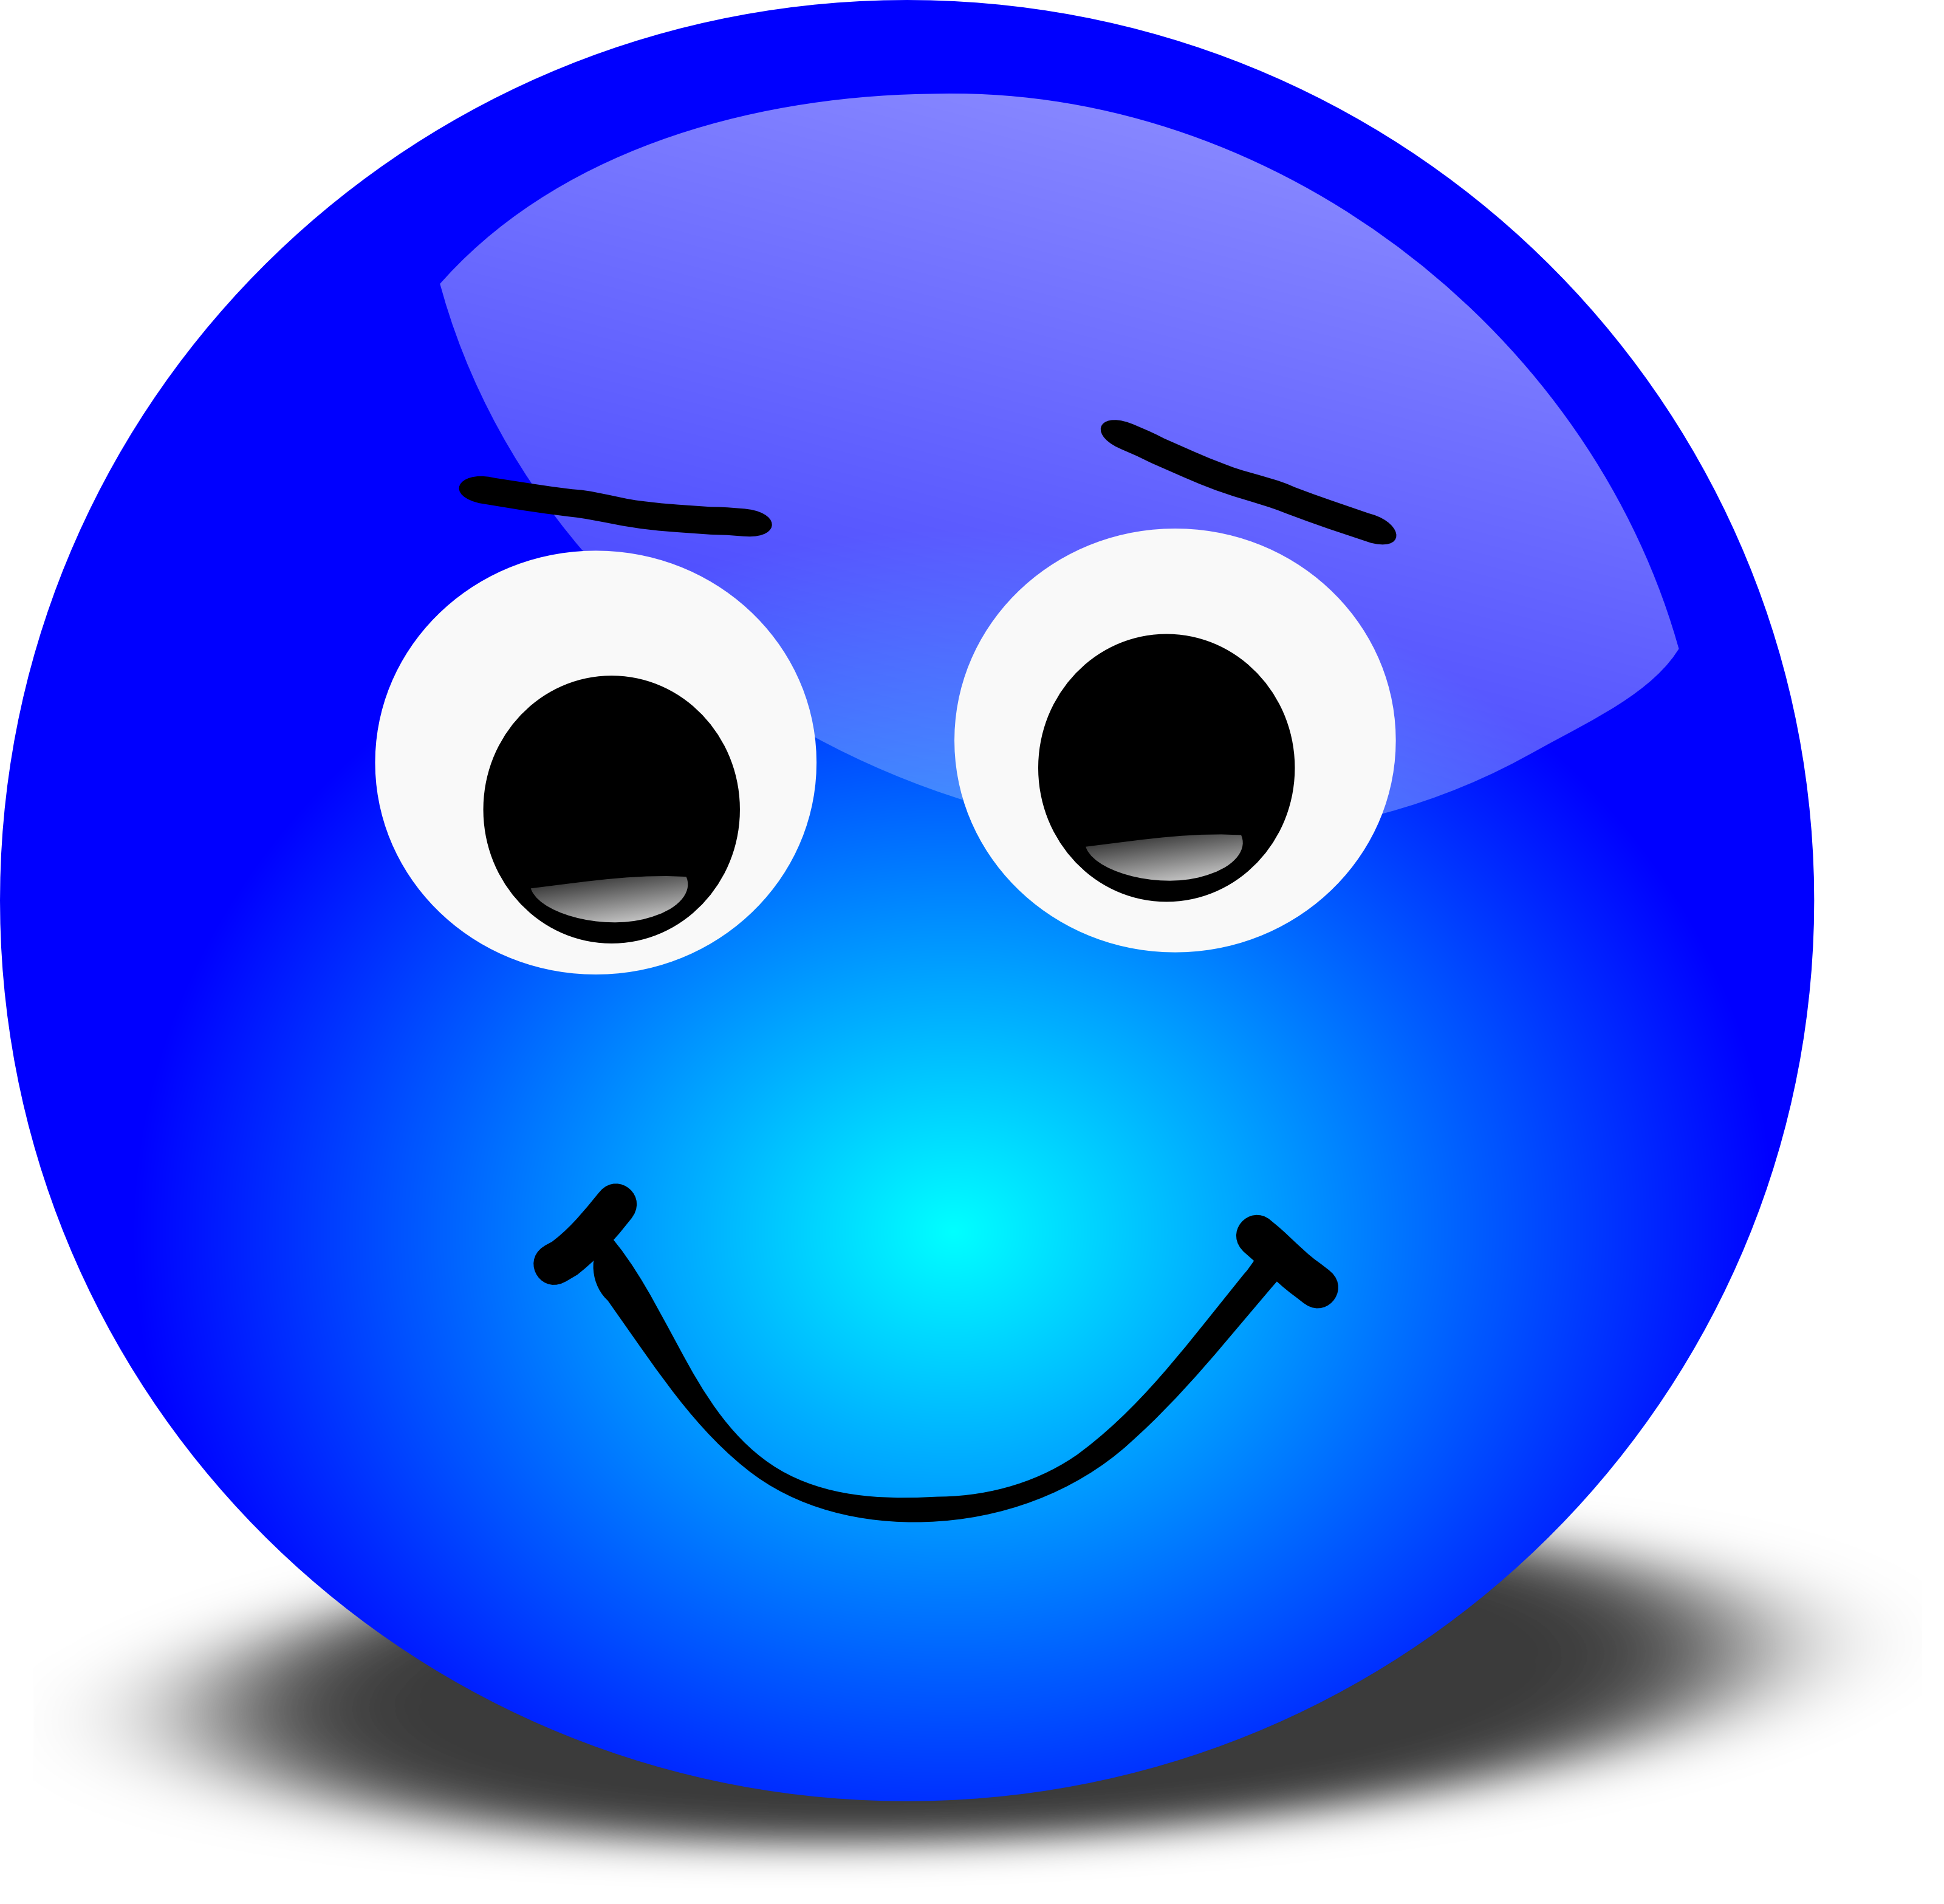 Smiley Face Png | Clipart Panda - Free Clipart Images - Smiling Smiley-Face